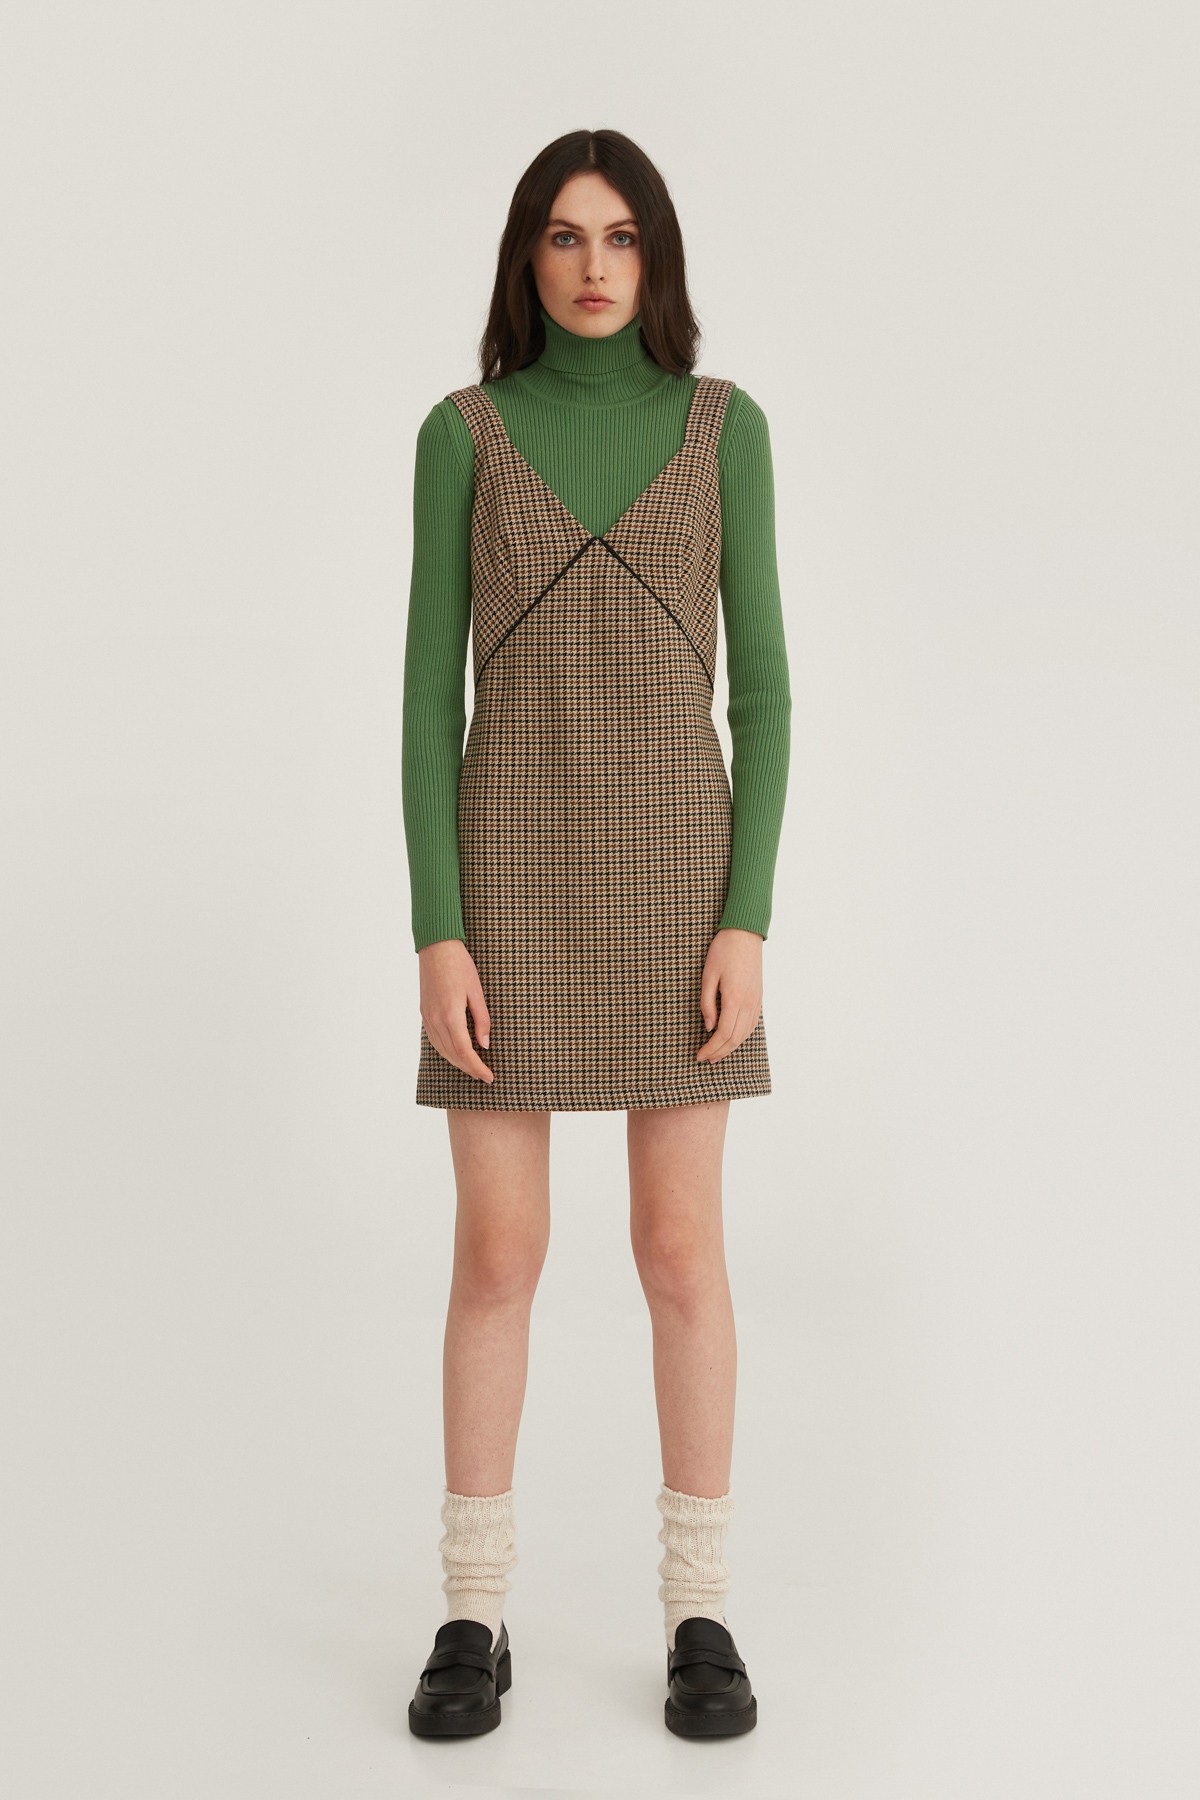 Straight-cut mini sundress in houndstooth pattern with wool